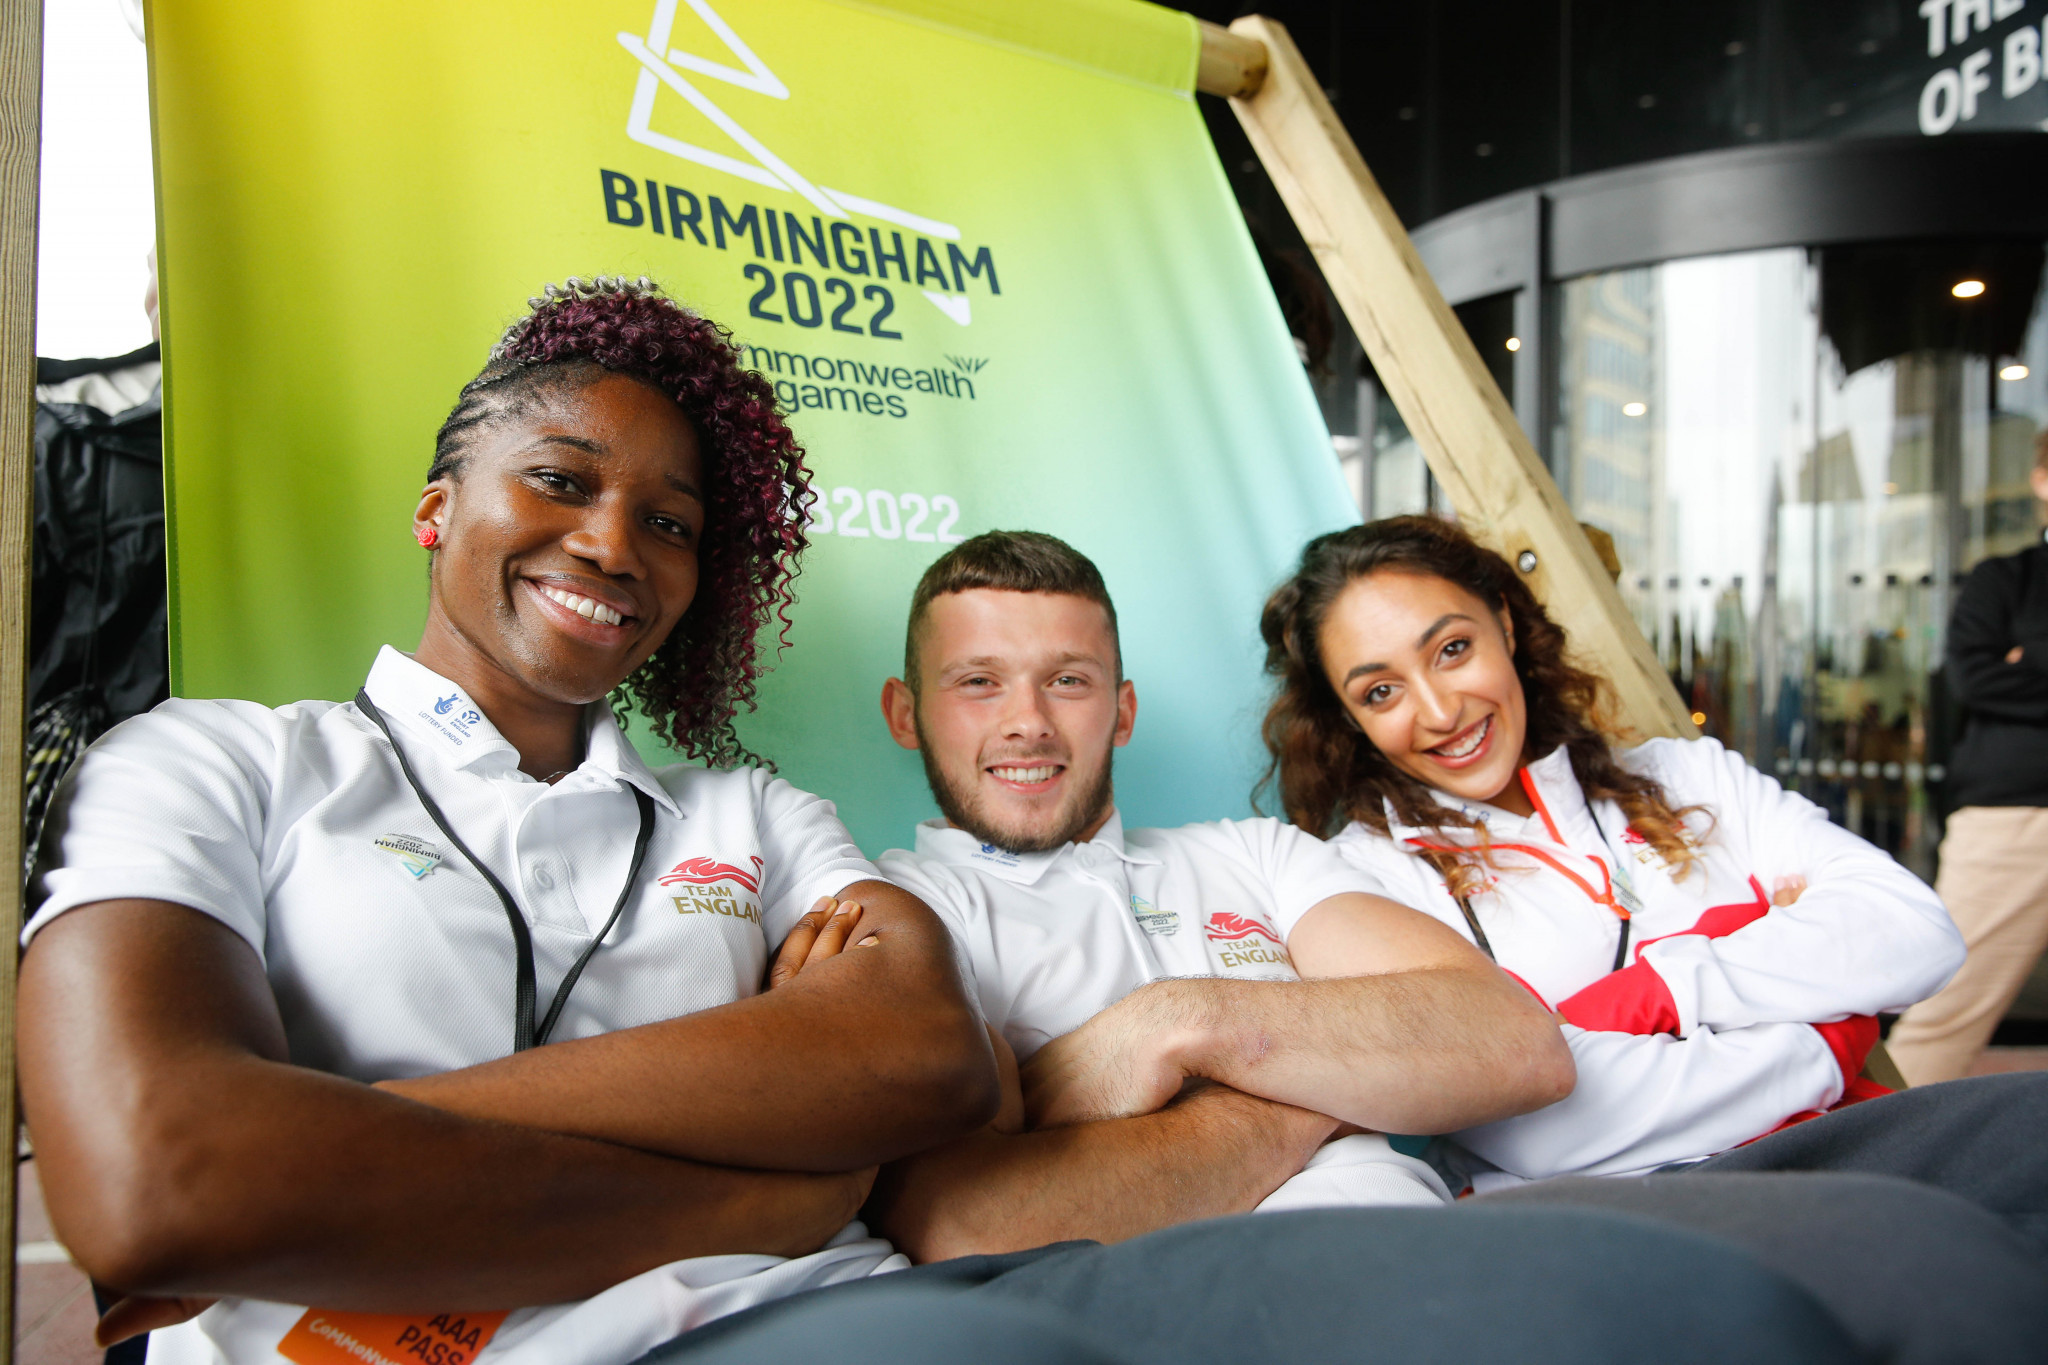 Team England netballer Ama Agbeze, gymnast Dom Cunningham and rhythmic gymnast Mimi Cesar promoting the Birmingham 2022 Commonwealth Games, which has just signed up local firm Cube International to design and sell its Games-related products ©Birmingham 2022